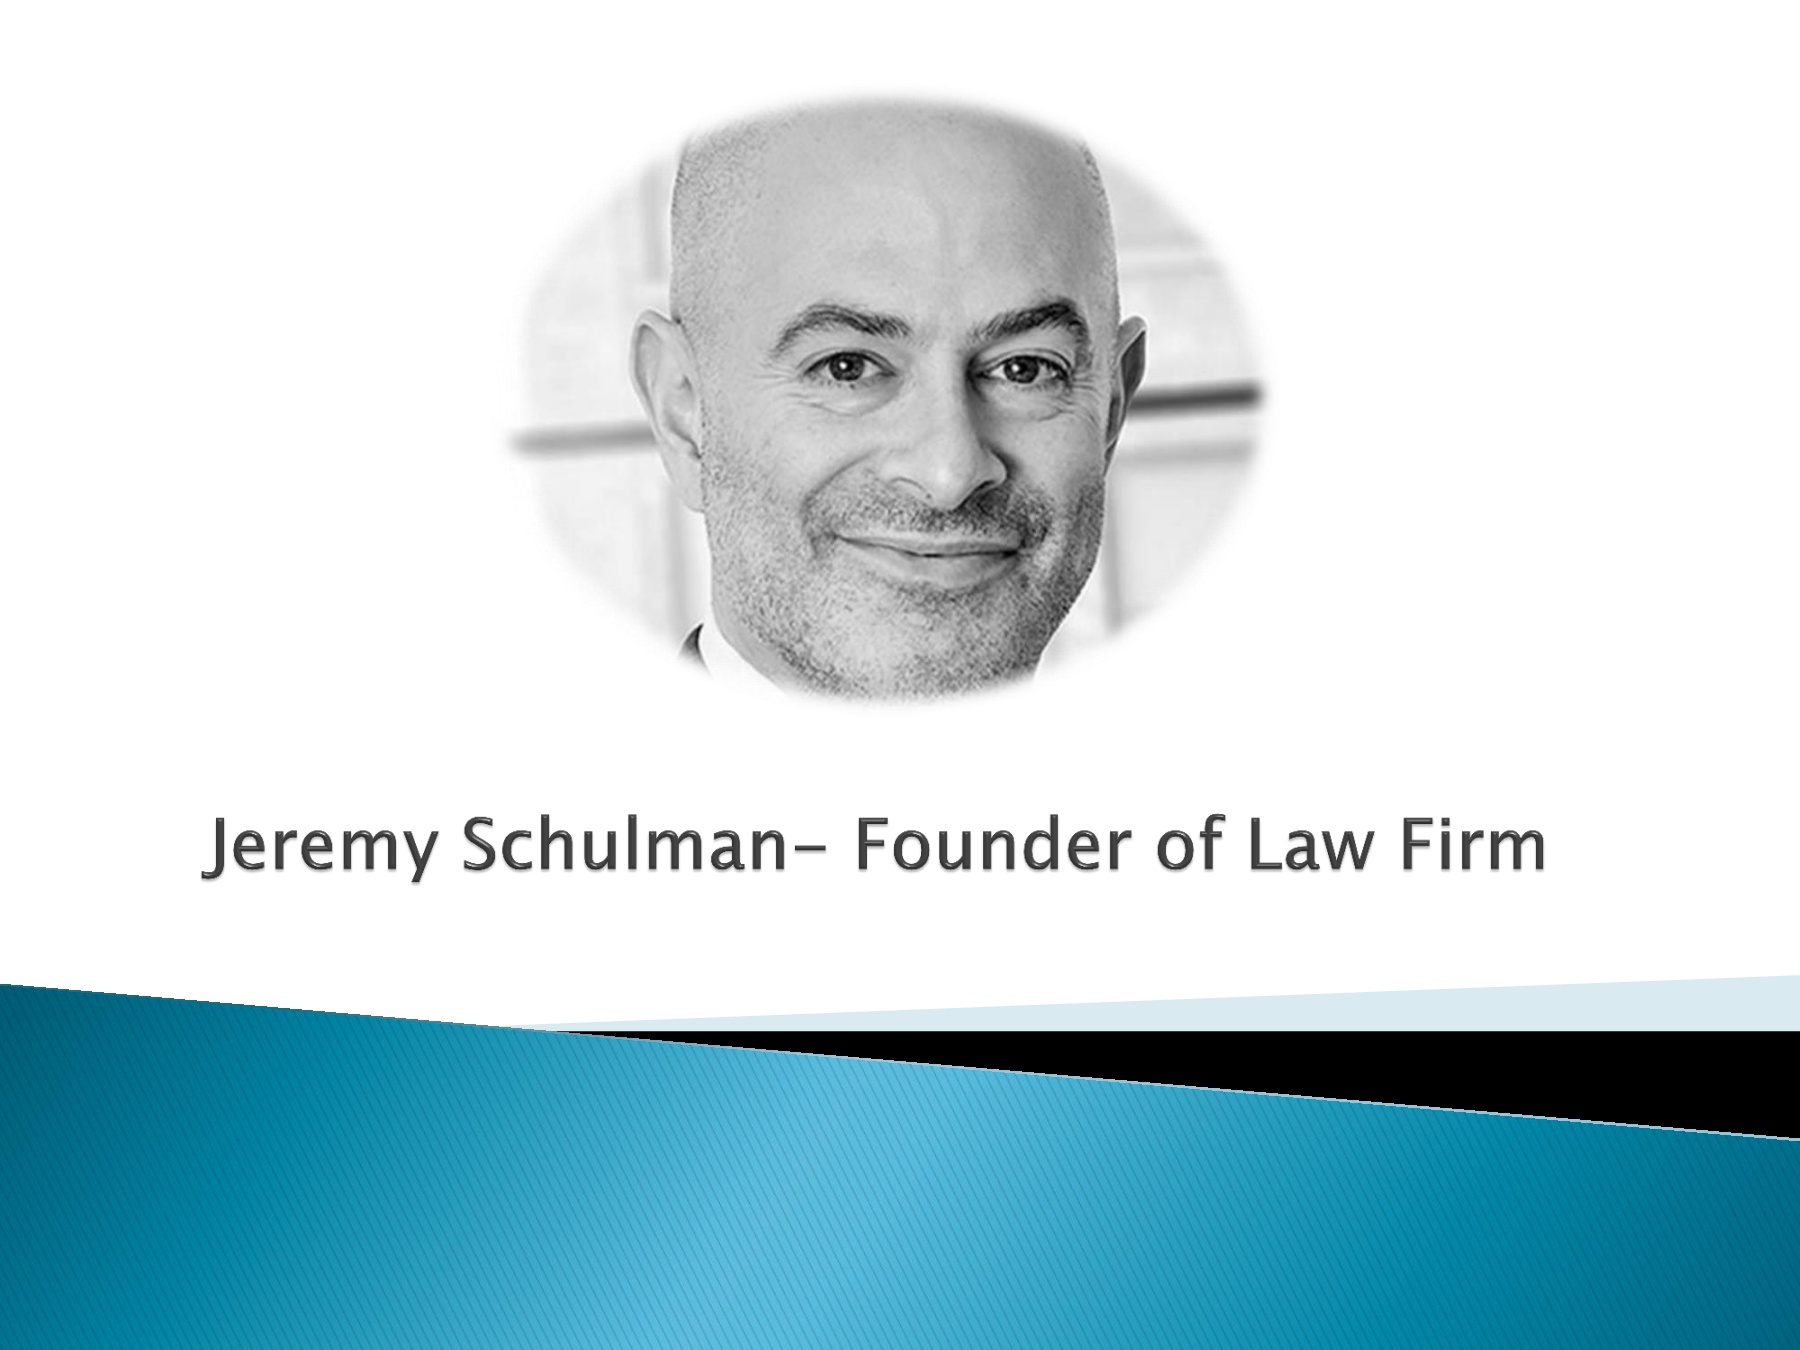 How To Get A Commercial Litigation Scholarship By Jeremy Schulman